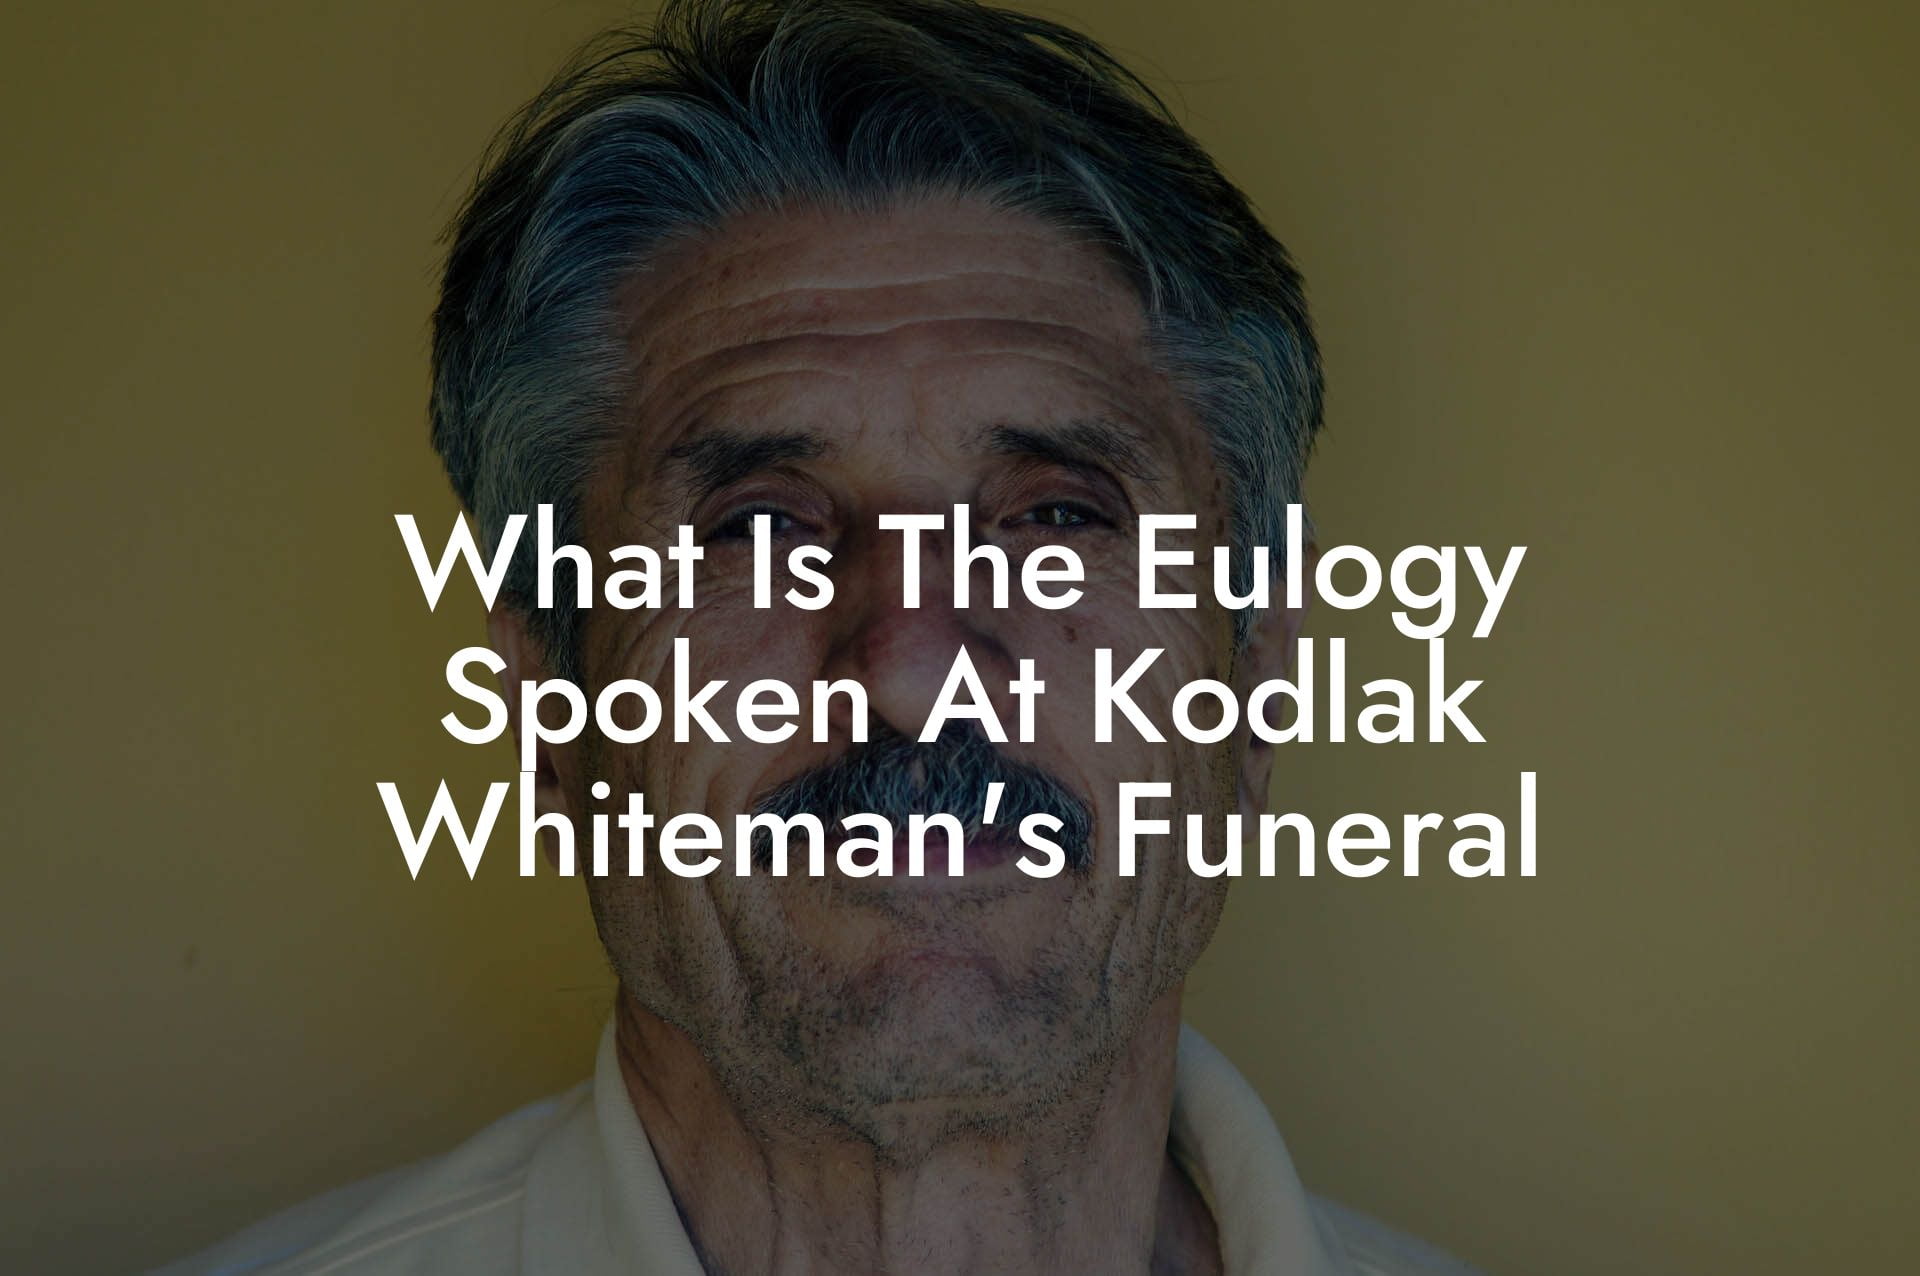 What Is The Eulogy Spoken At Kodlak Whiteman's Funeral